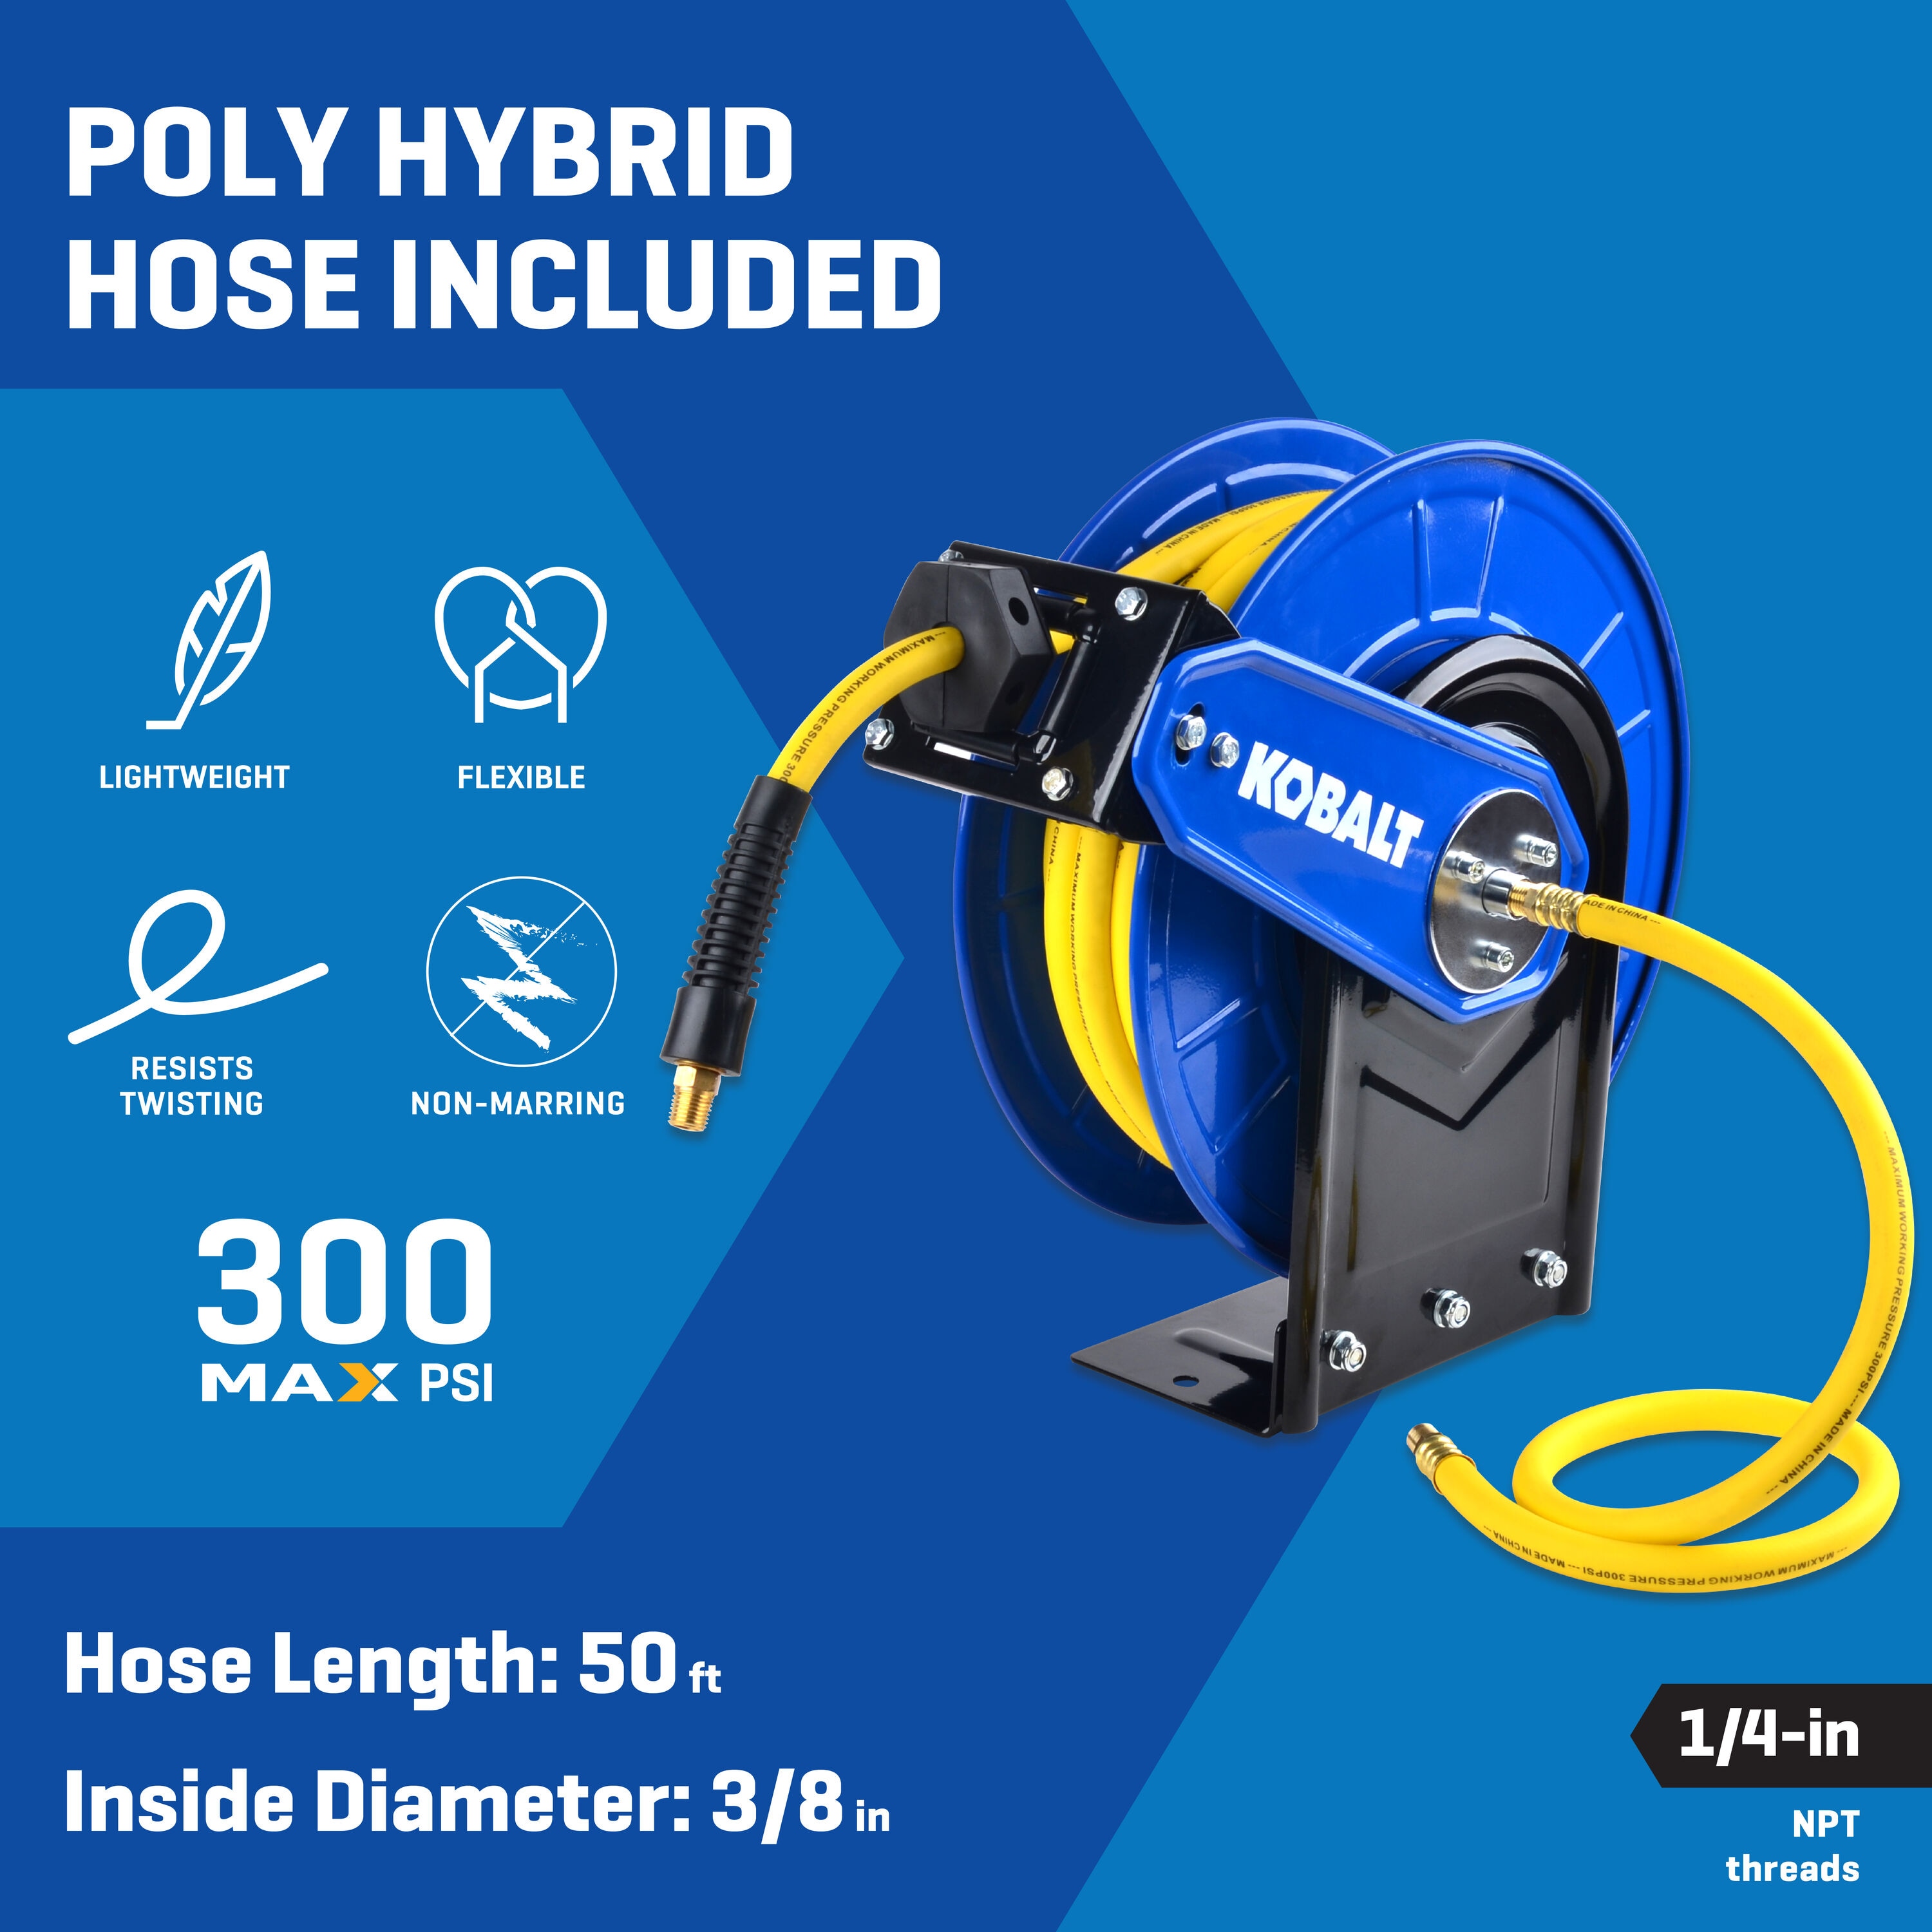 HUSKY Retractable Wall-mount Enclosed Hybrid Air Hose Reel, 3/8 in. x 50 ft.